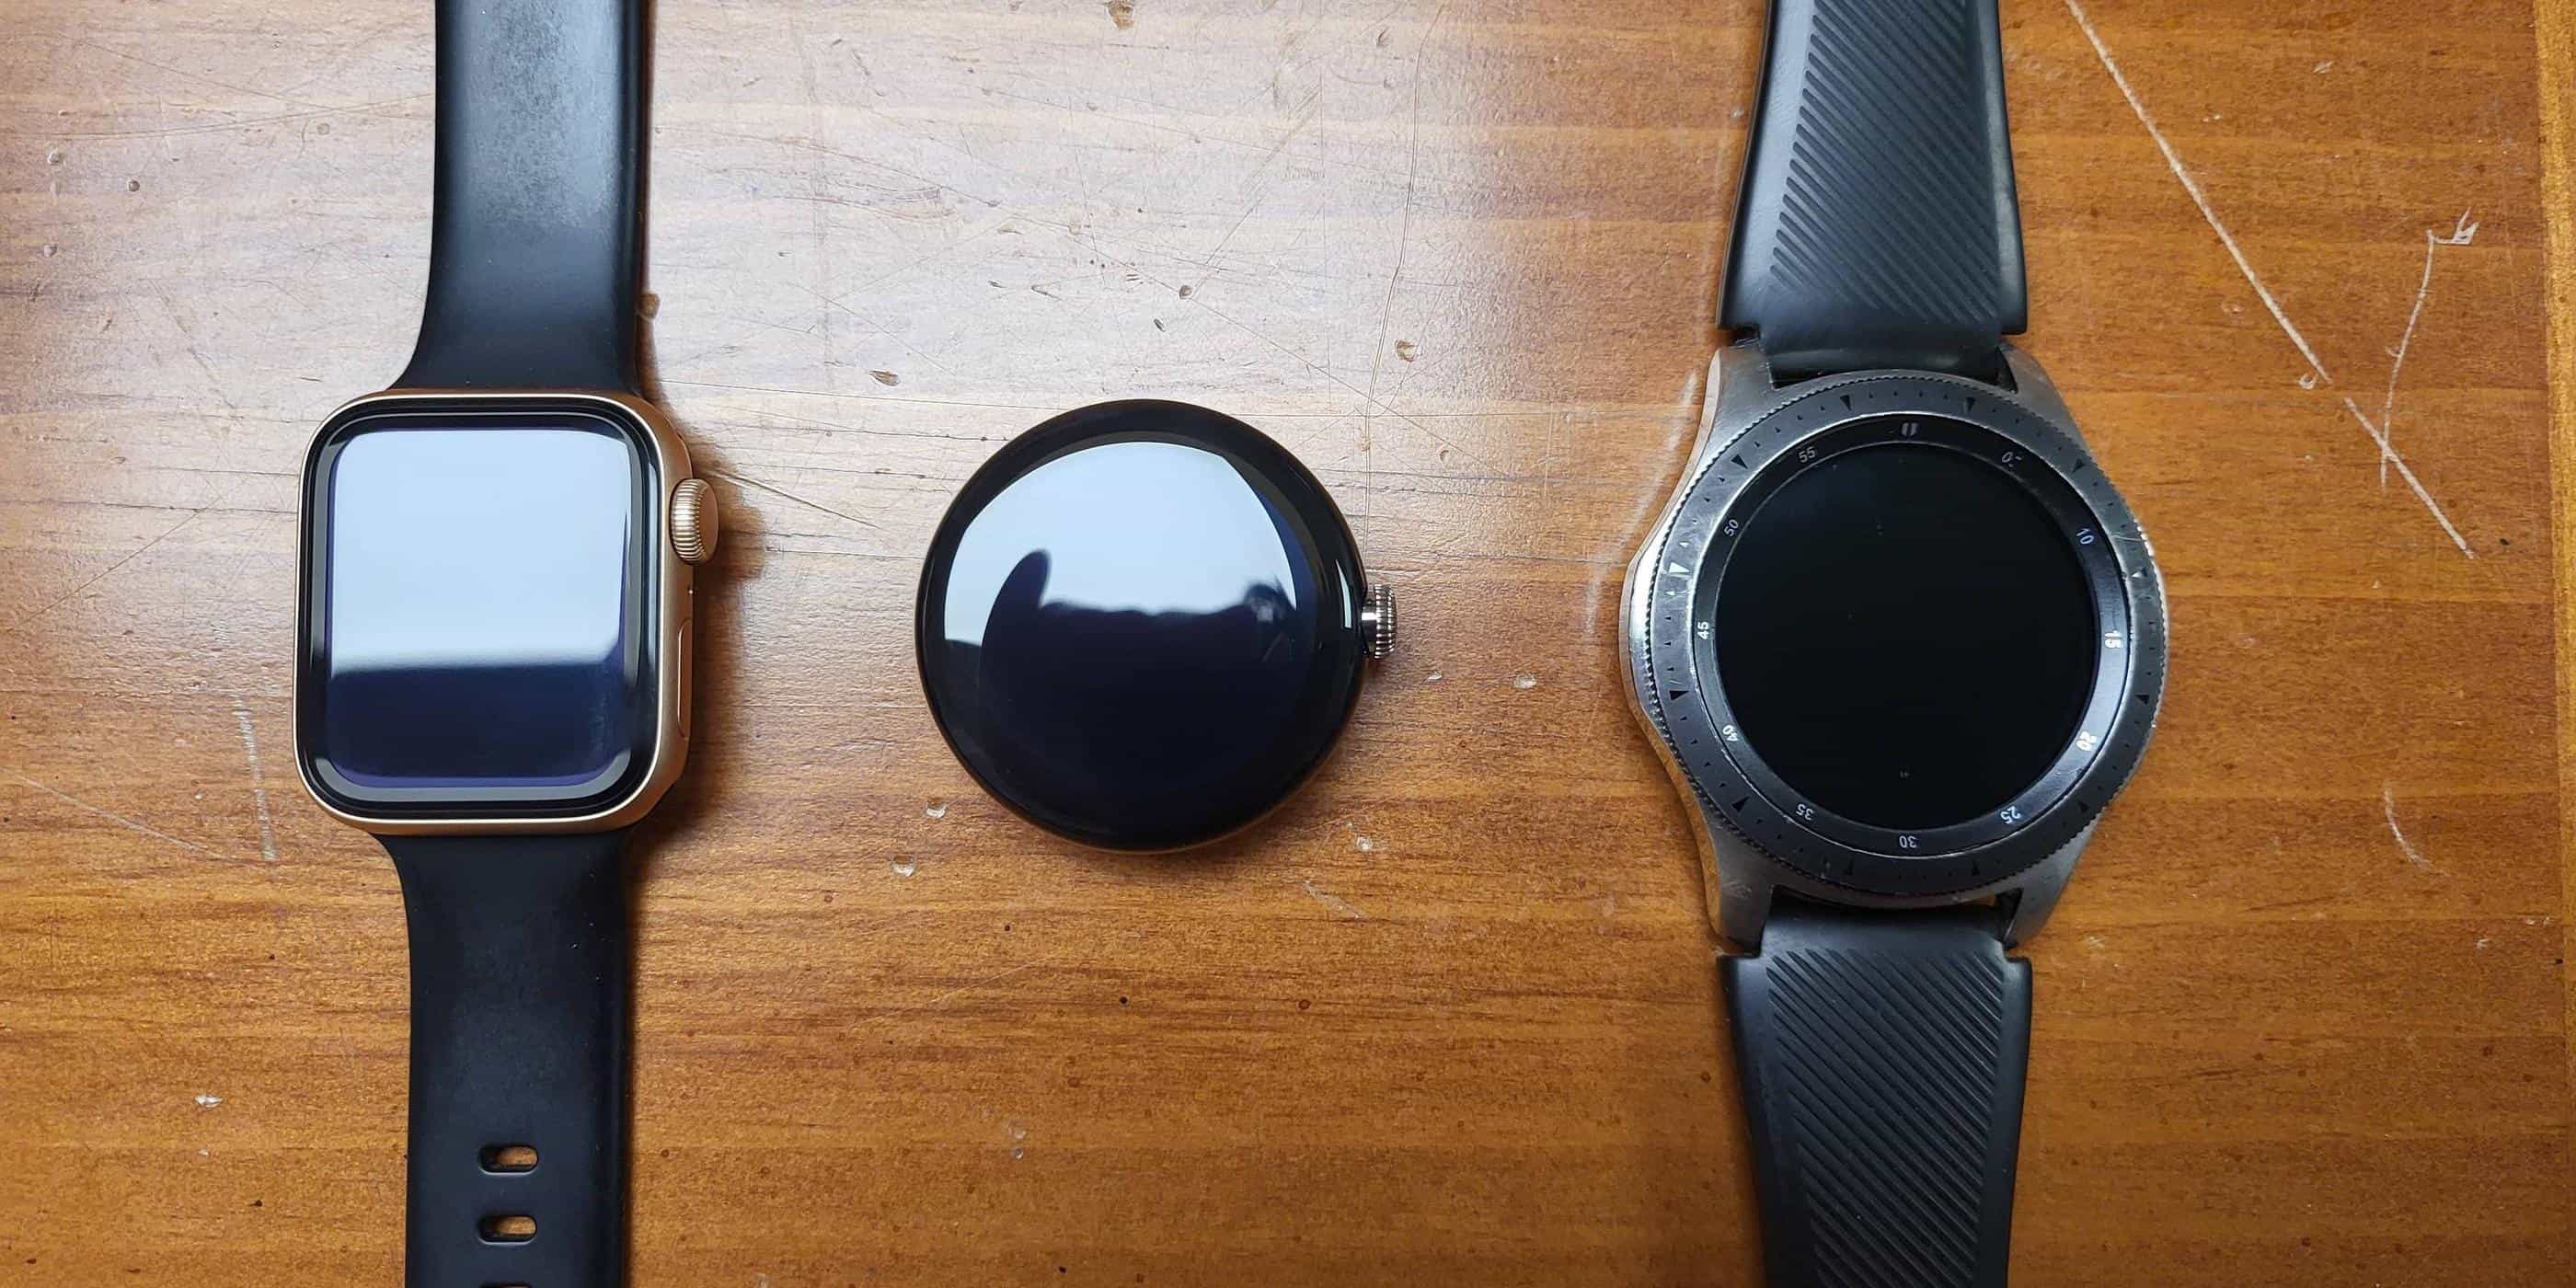 Pixel Watch price: How it compares, and is it worth it? - 9to5Google